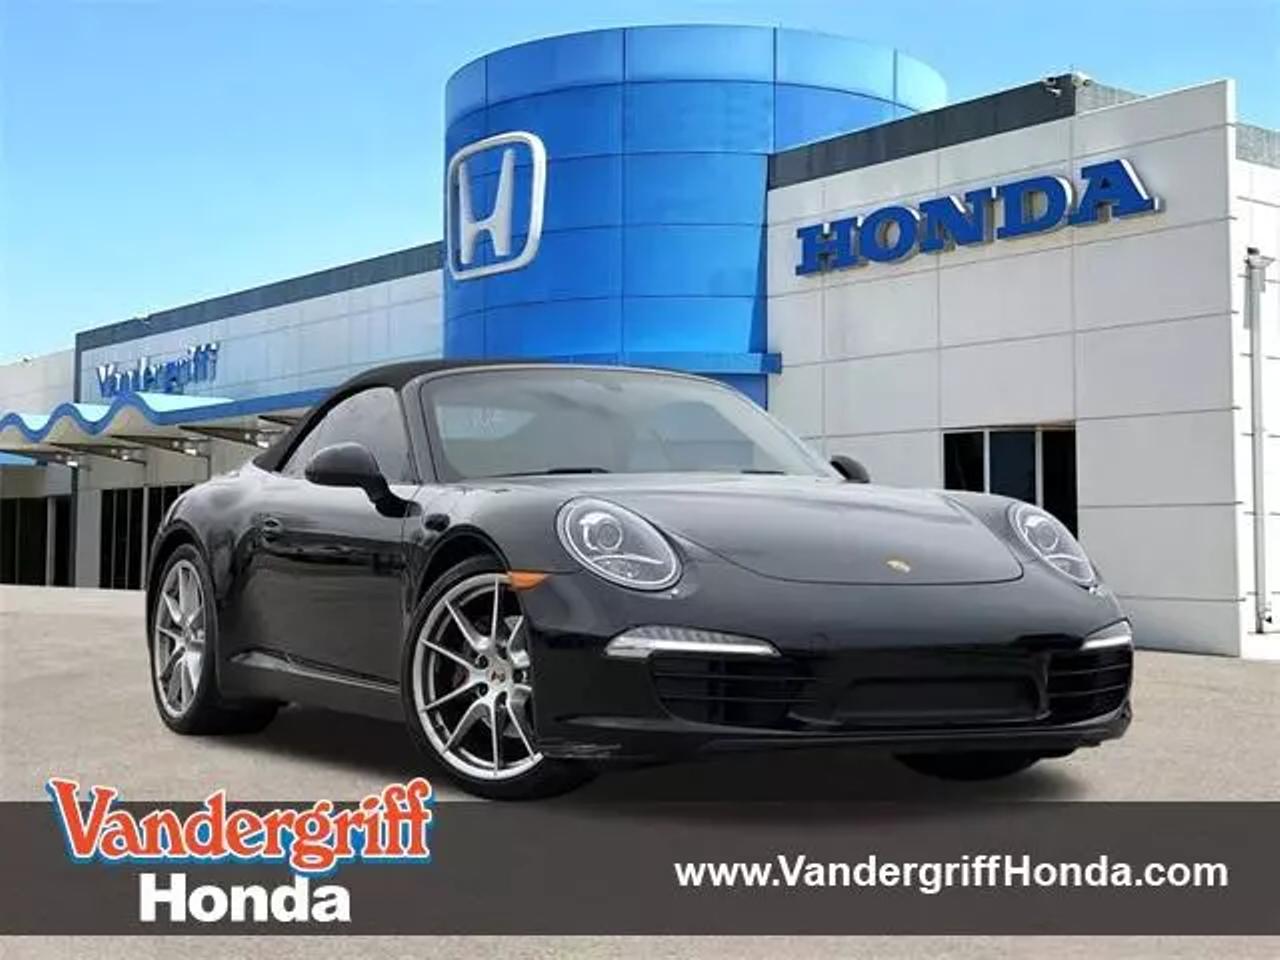 Porsche 911 Carrera 4 Cabriolet for sale | Used 911 Carrera 4 Cabriolet  near you in the US | CarBuzz